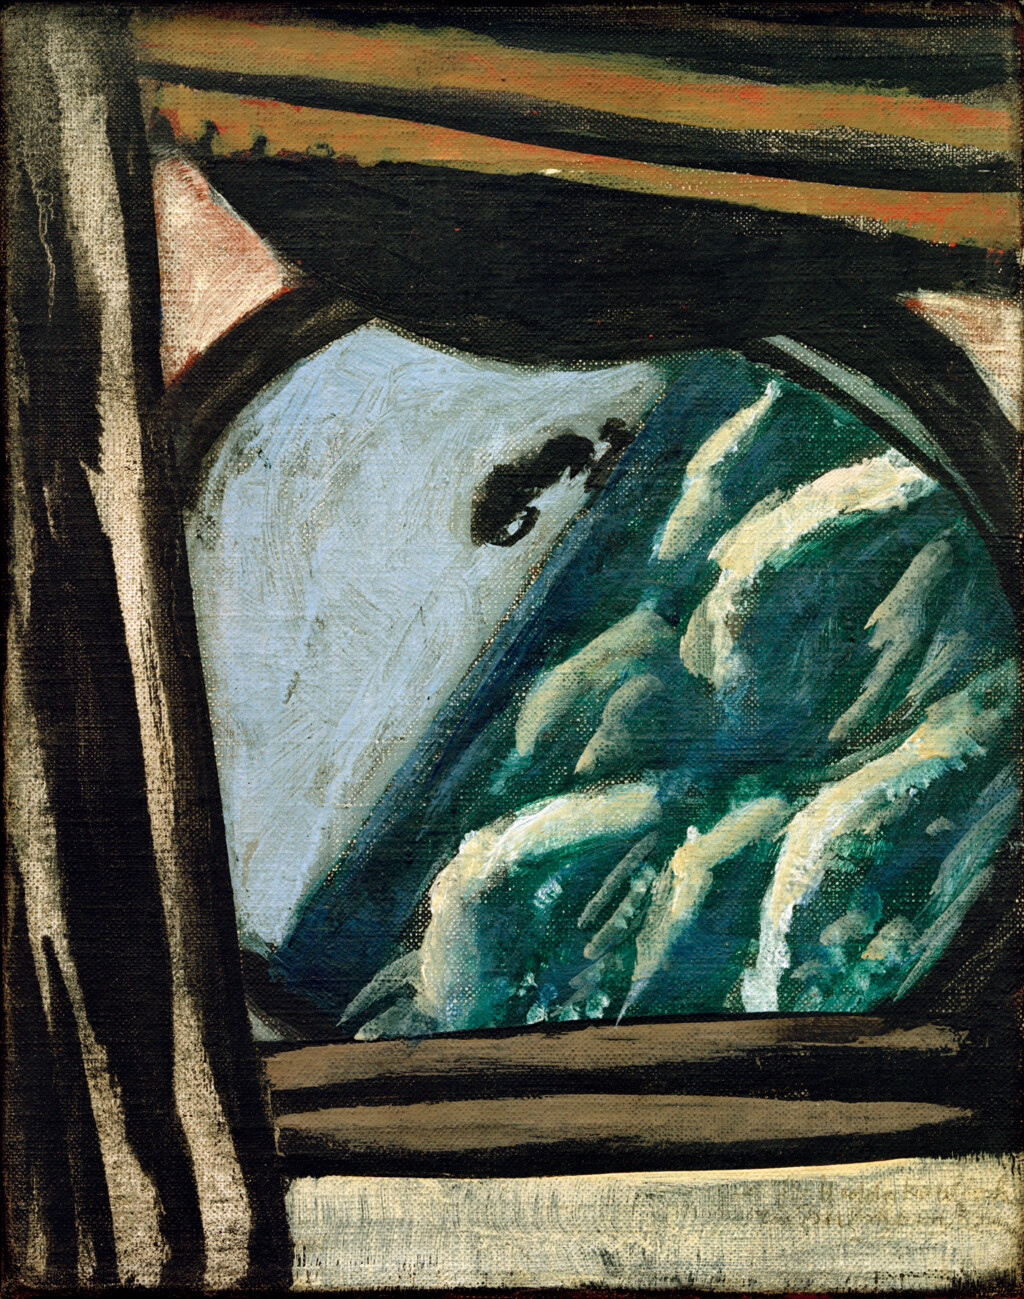  Max Beckmann, View from the port hole, 1934

